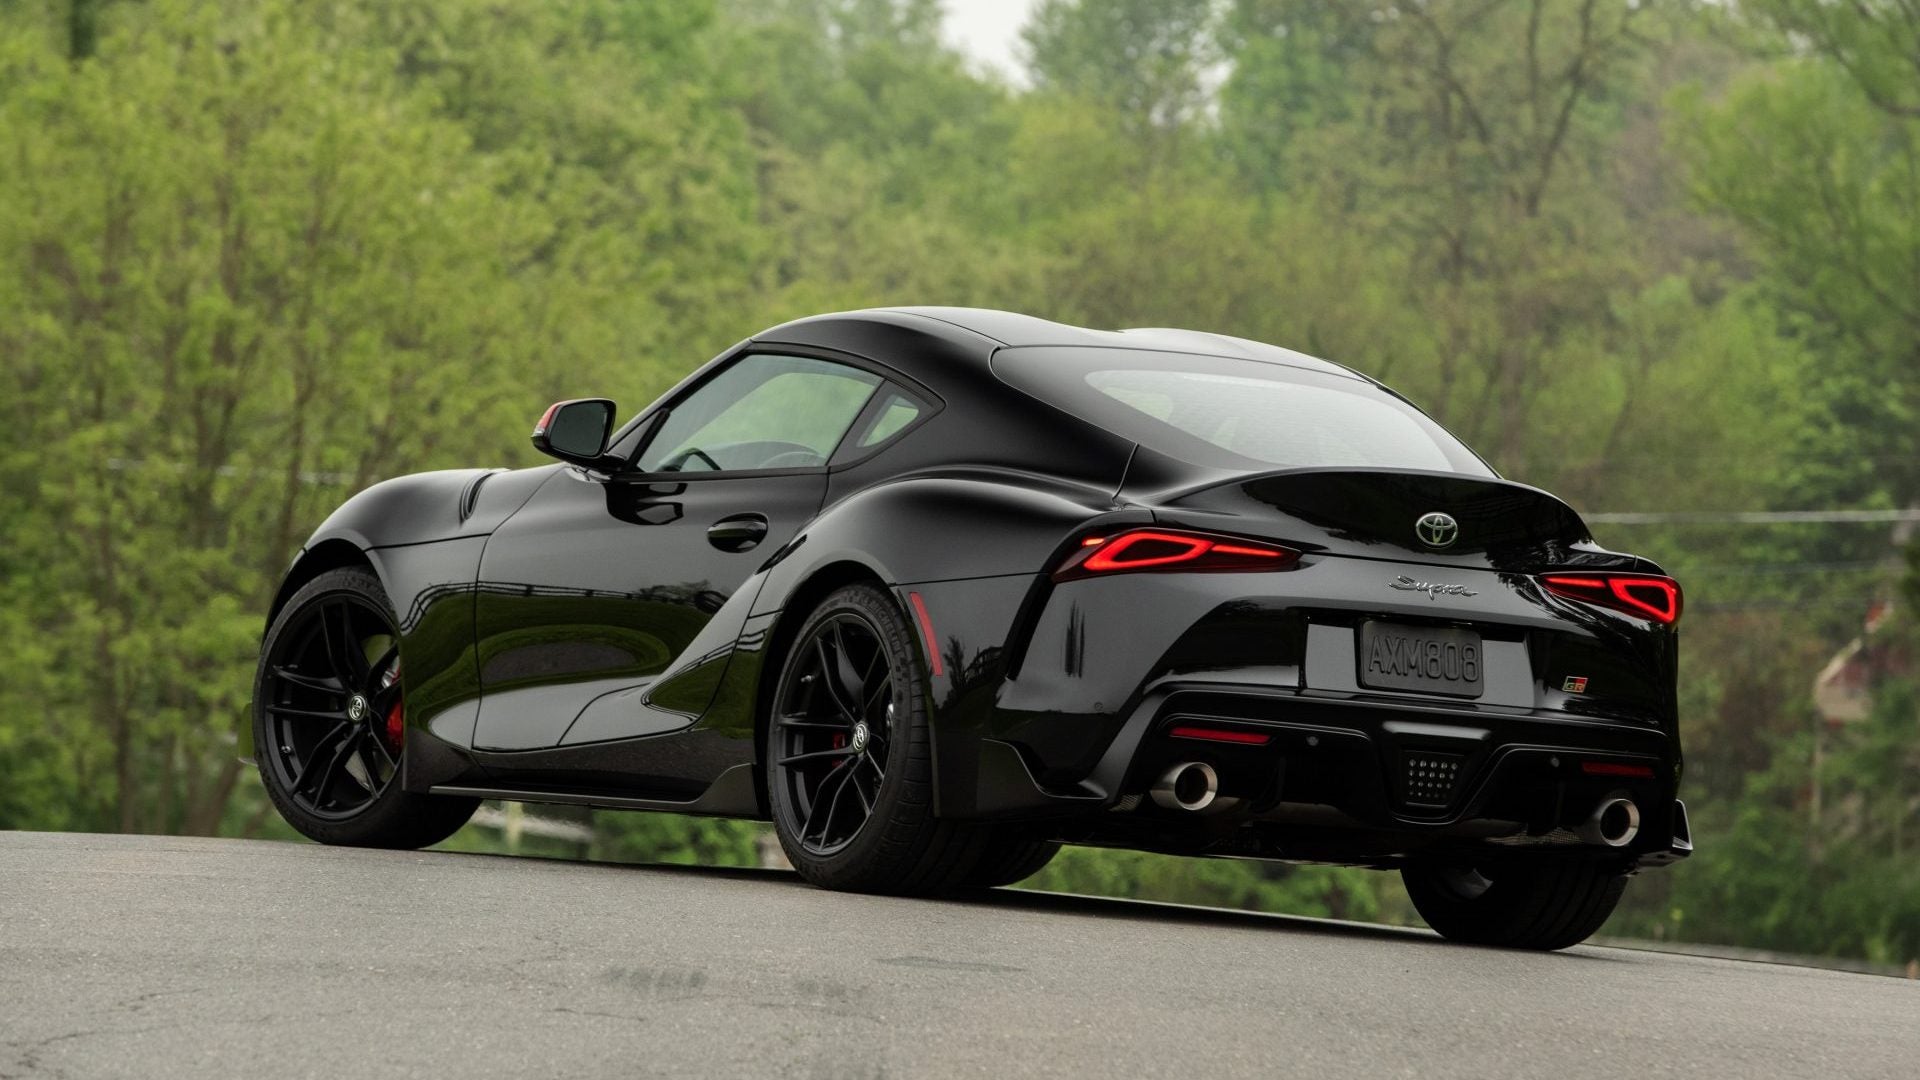 A Hotter Toyota Supra GRMN With 400 HP Could Be In the Works Report